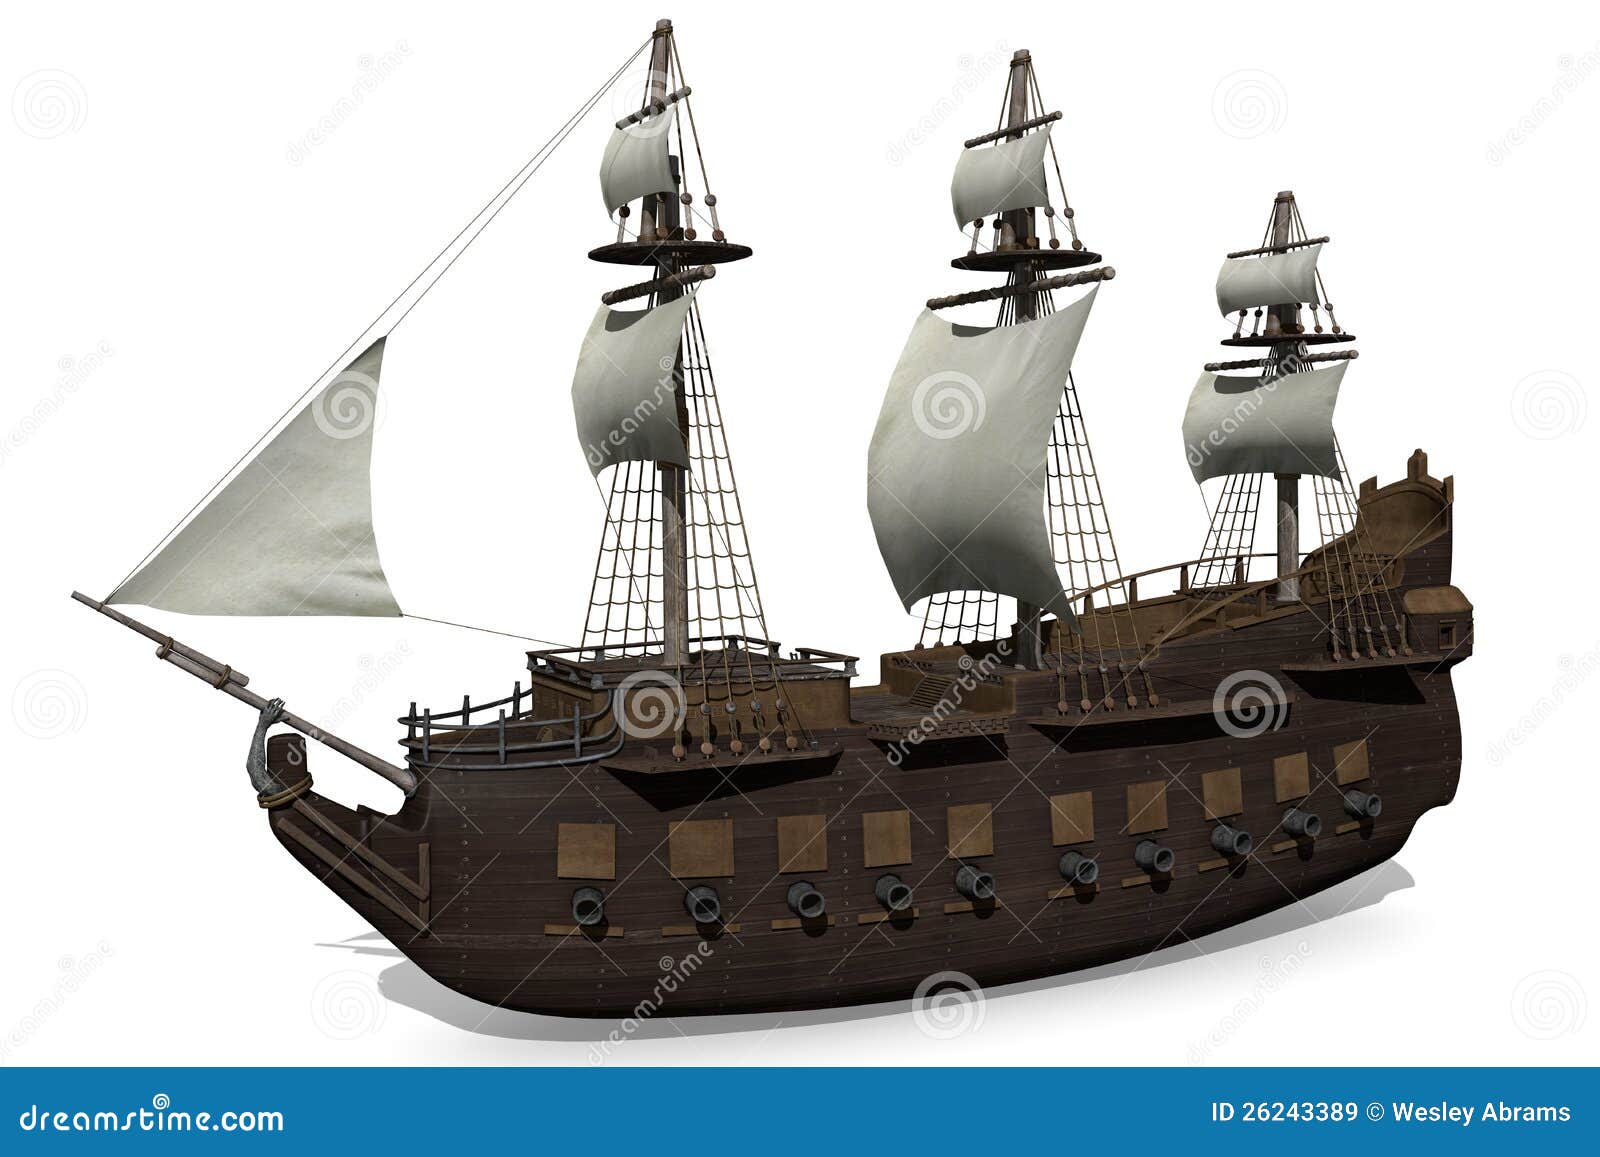 Medieval Ship Royalty Free Stock Images - Image: 26243389